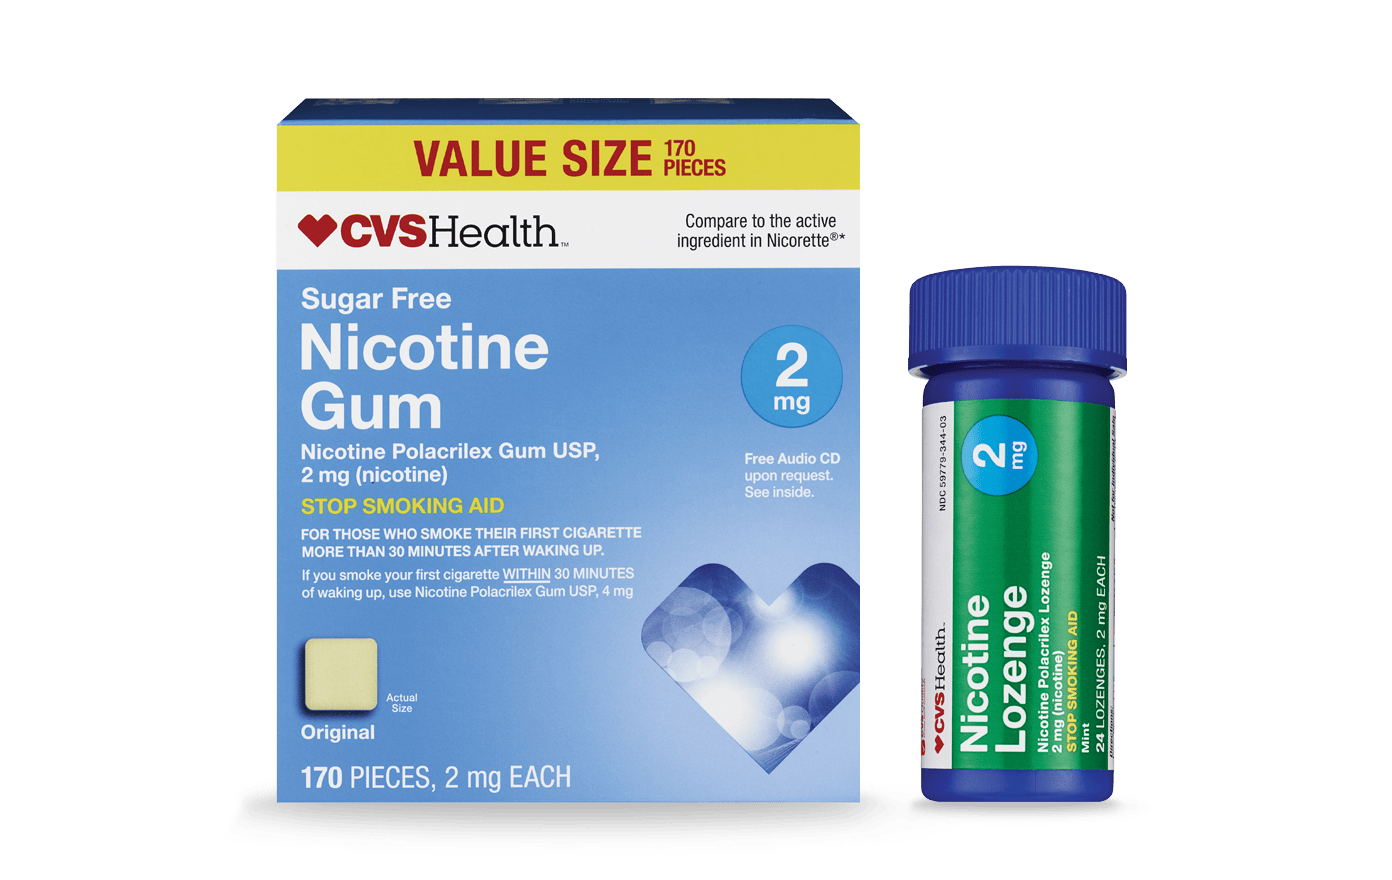 CVS Health nicotine replacement products